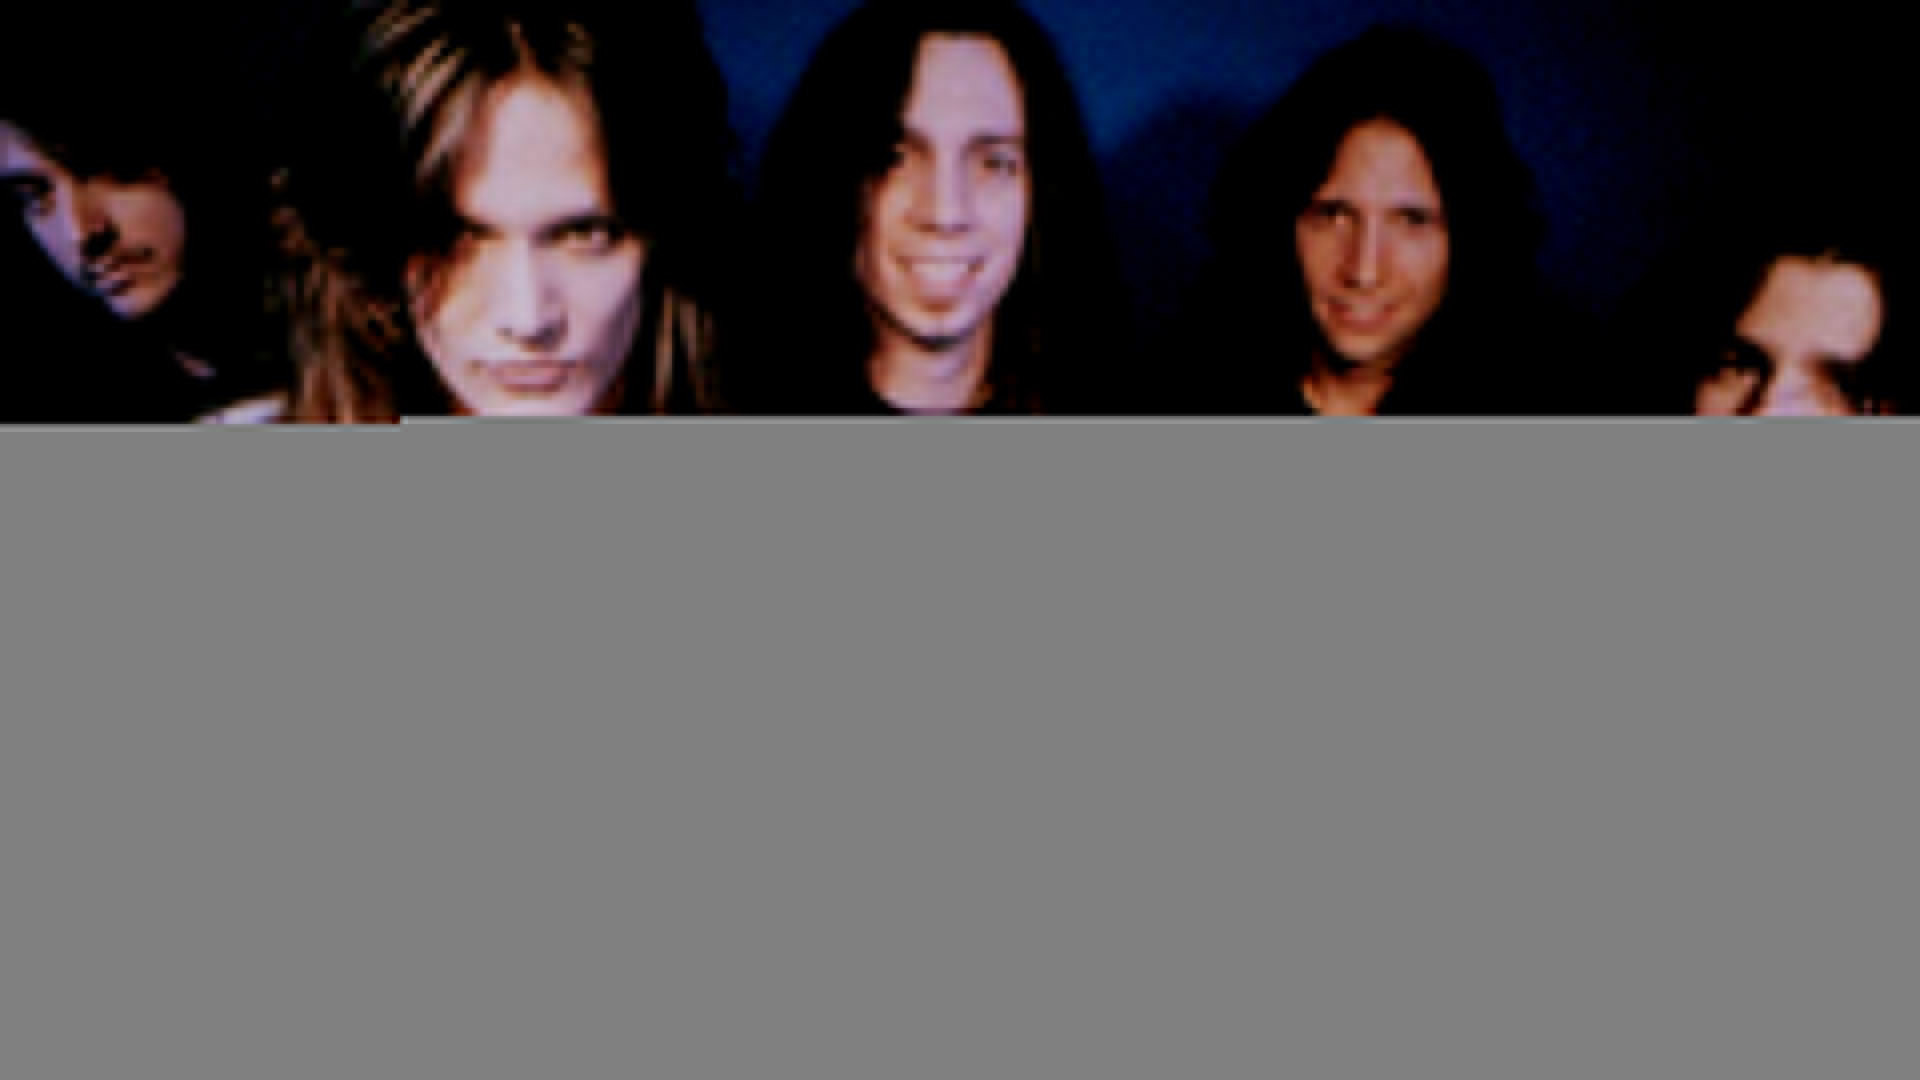 1920x1080  Wallpapers Skids Skid Row Band Pictures  | #186219 #skids